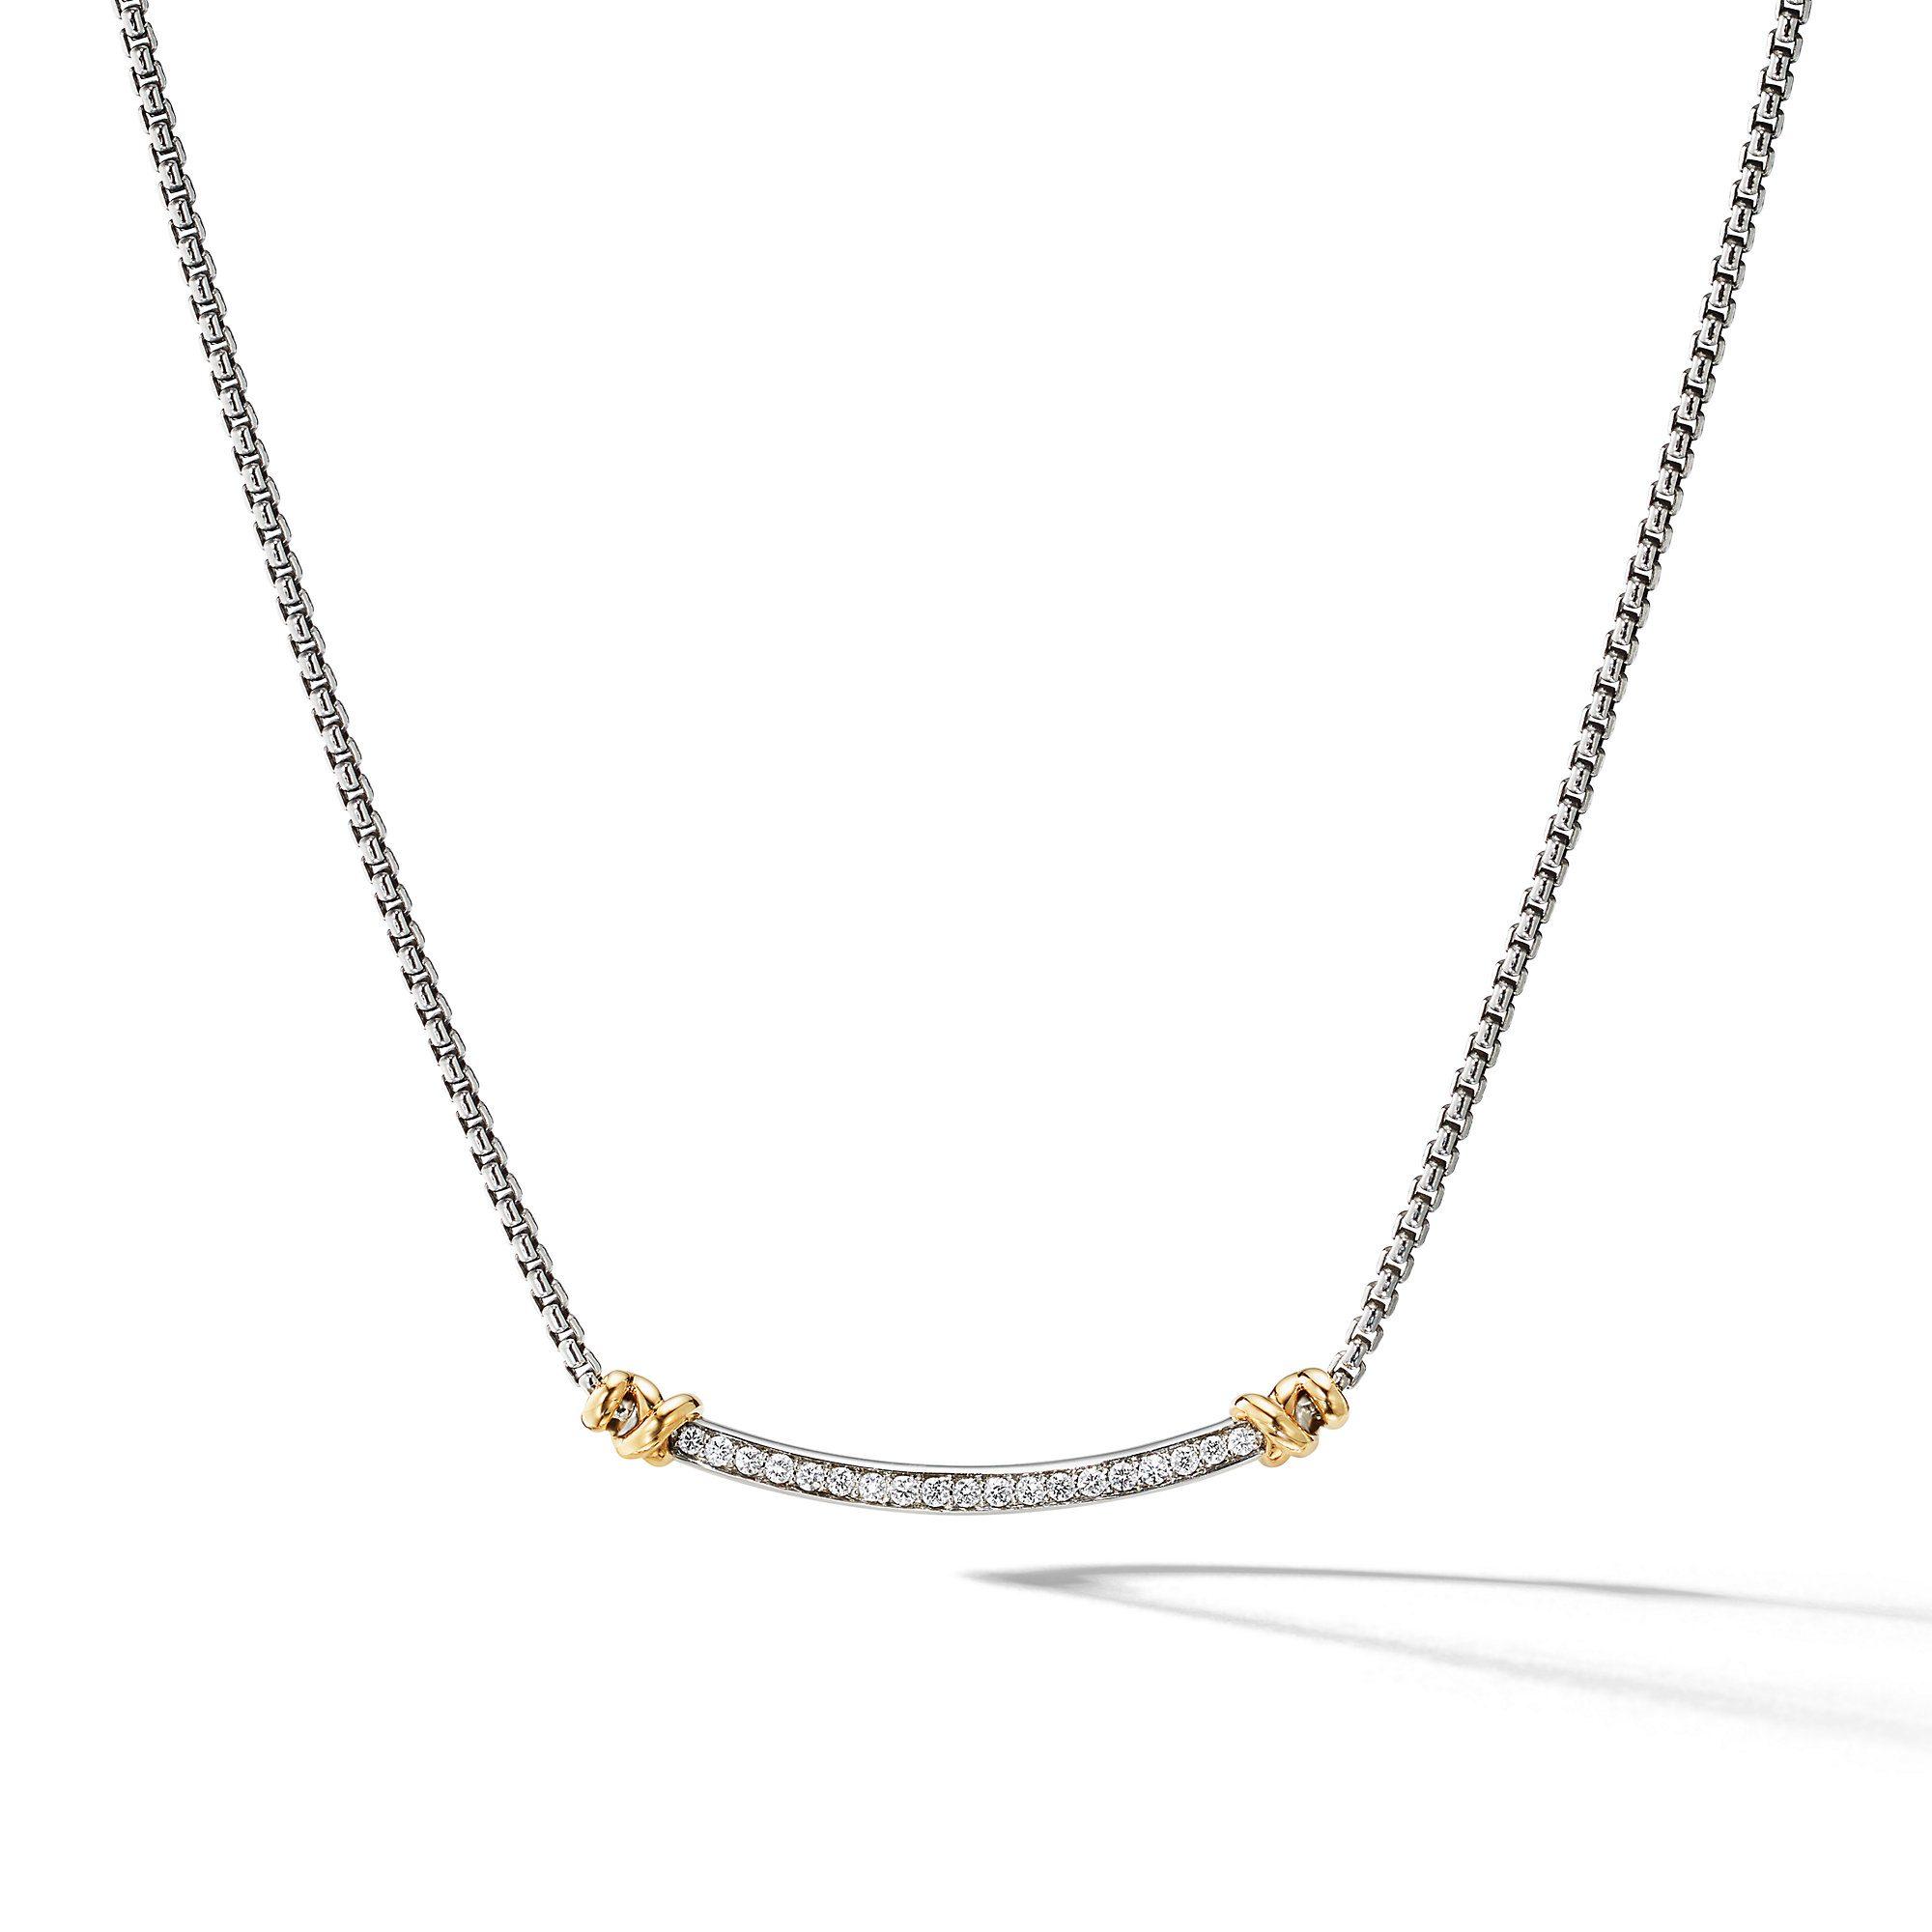 David Yurman | Petite Helena Station Necklace with 18K Yellow Gold and Diamonds | Front View